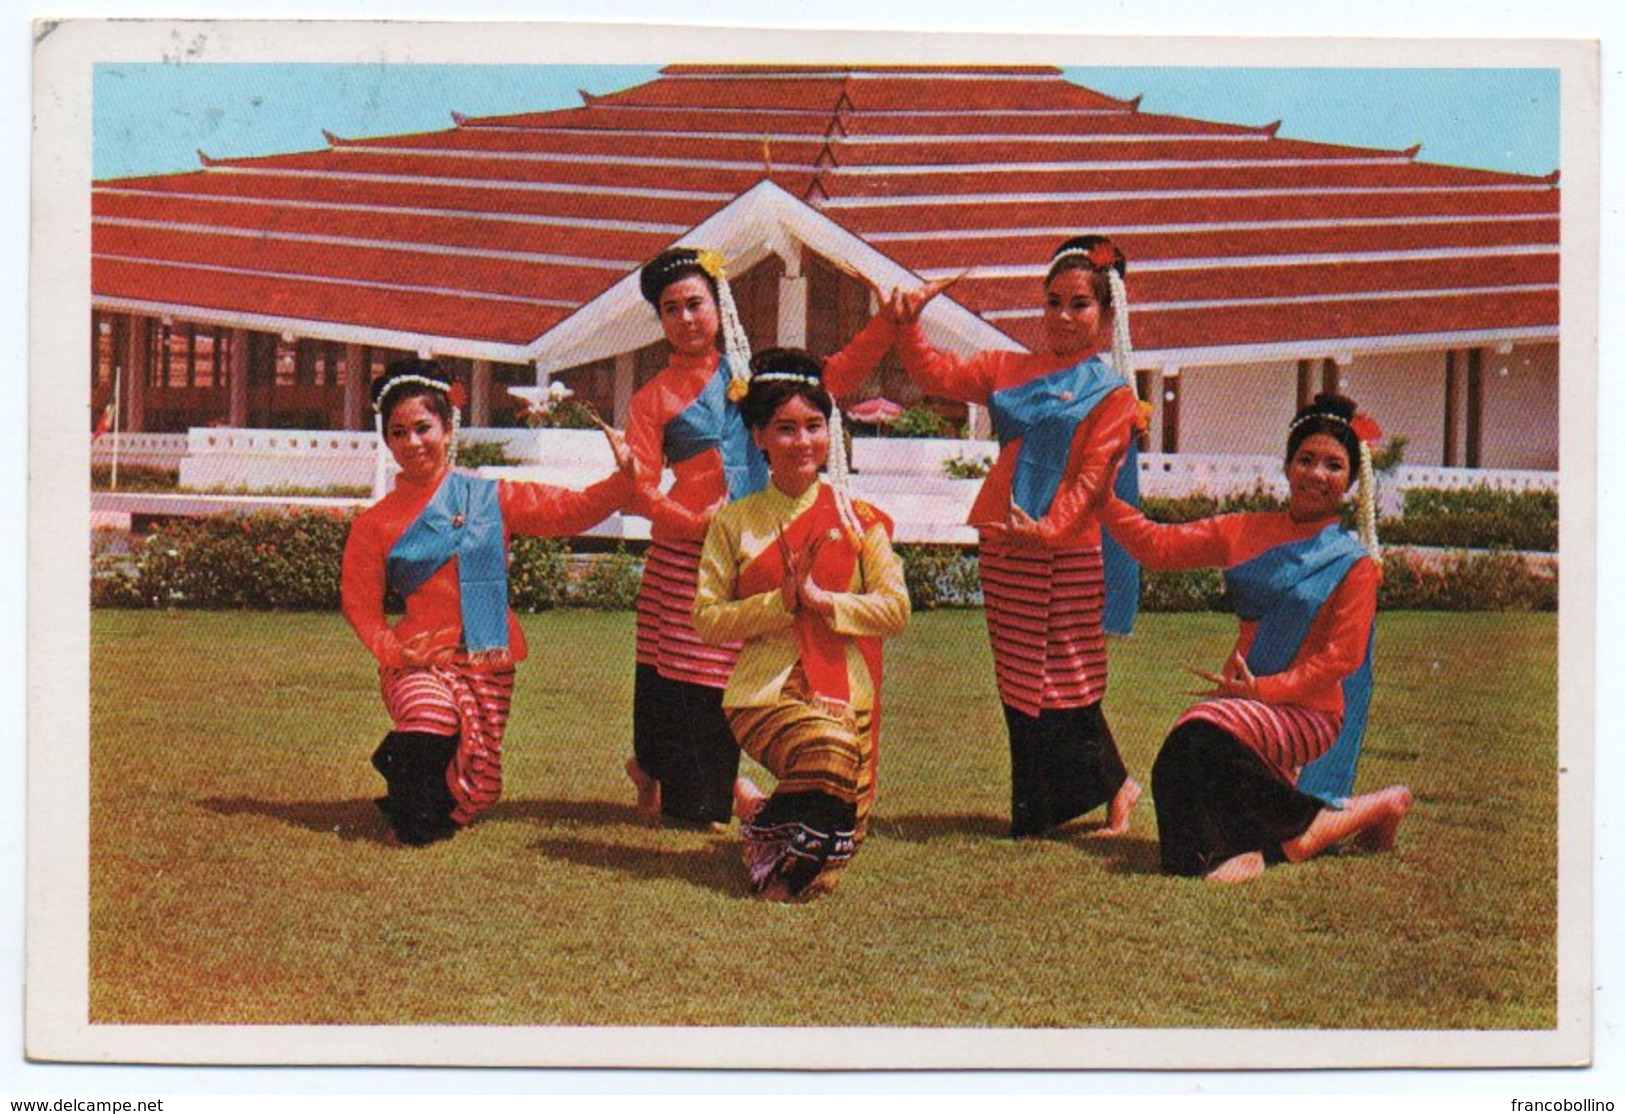 DANCE APPLYING THE FINGER NAILS- NORTH THAILAND / CIRCULATED FROM SUDAN 1978/THEMATIC STAMPS-ARAB POSTAL UNION - Thailand